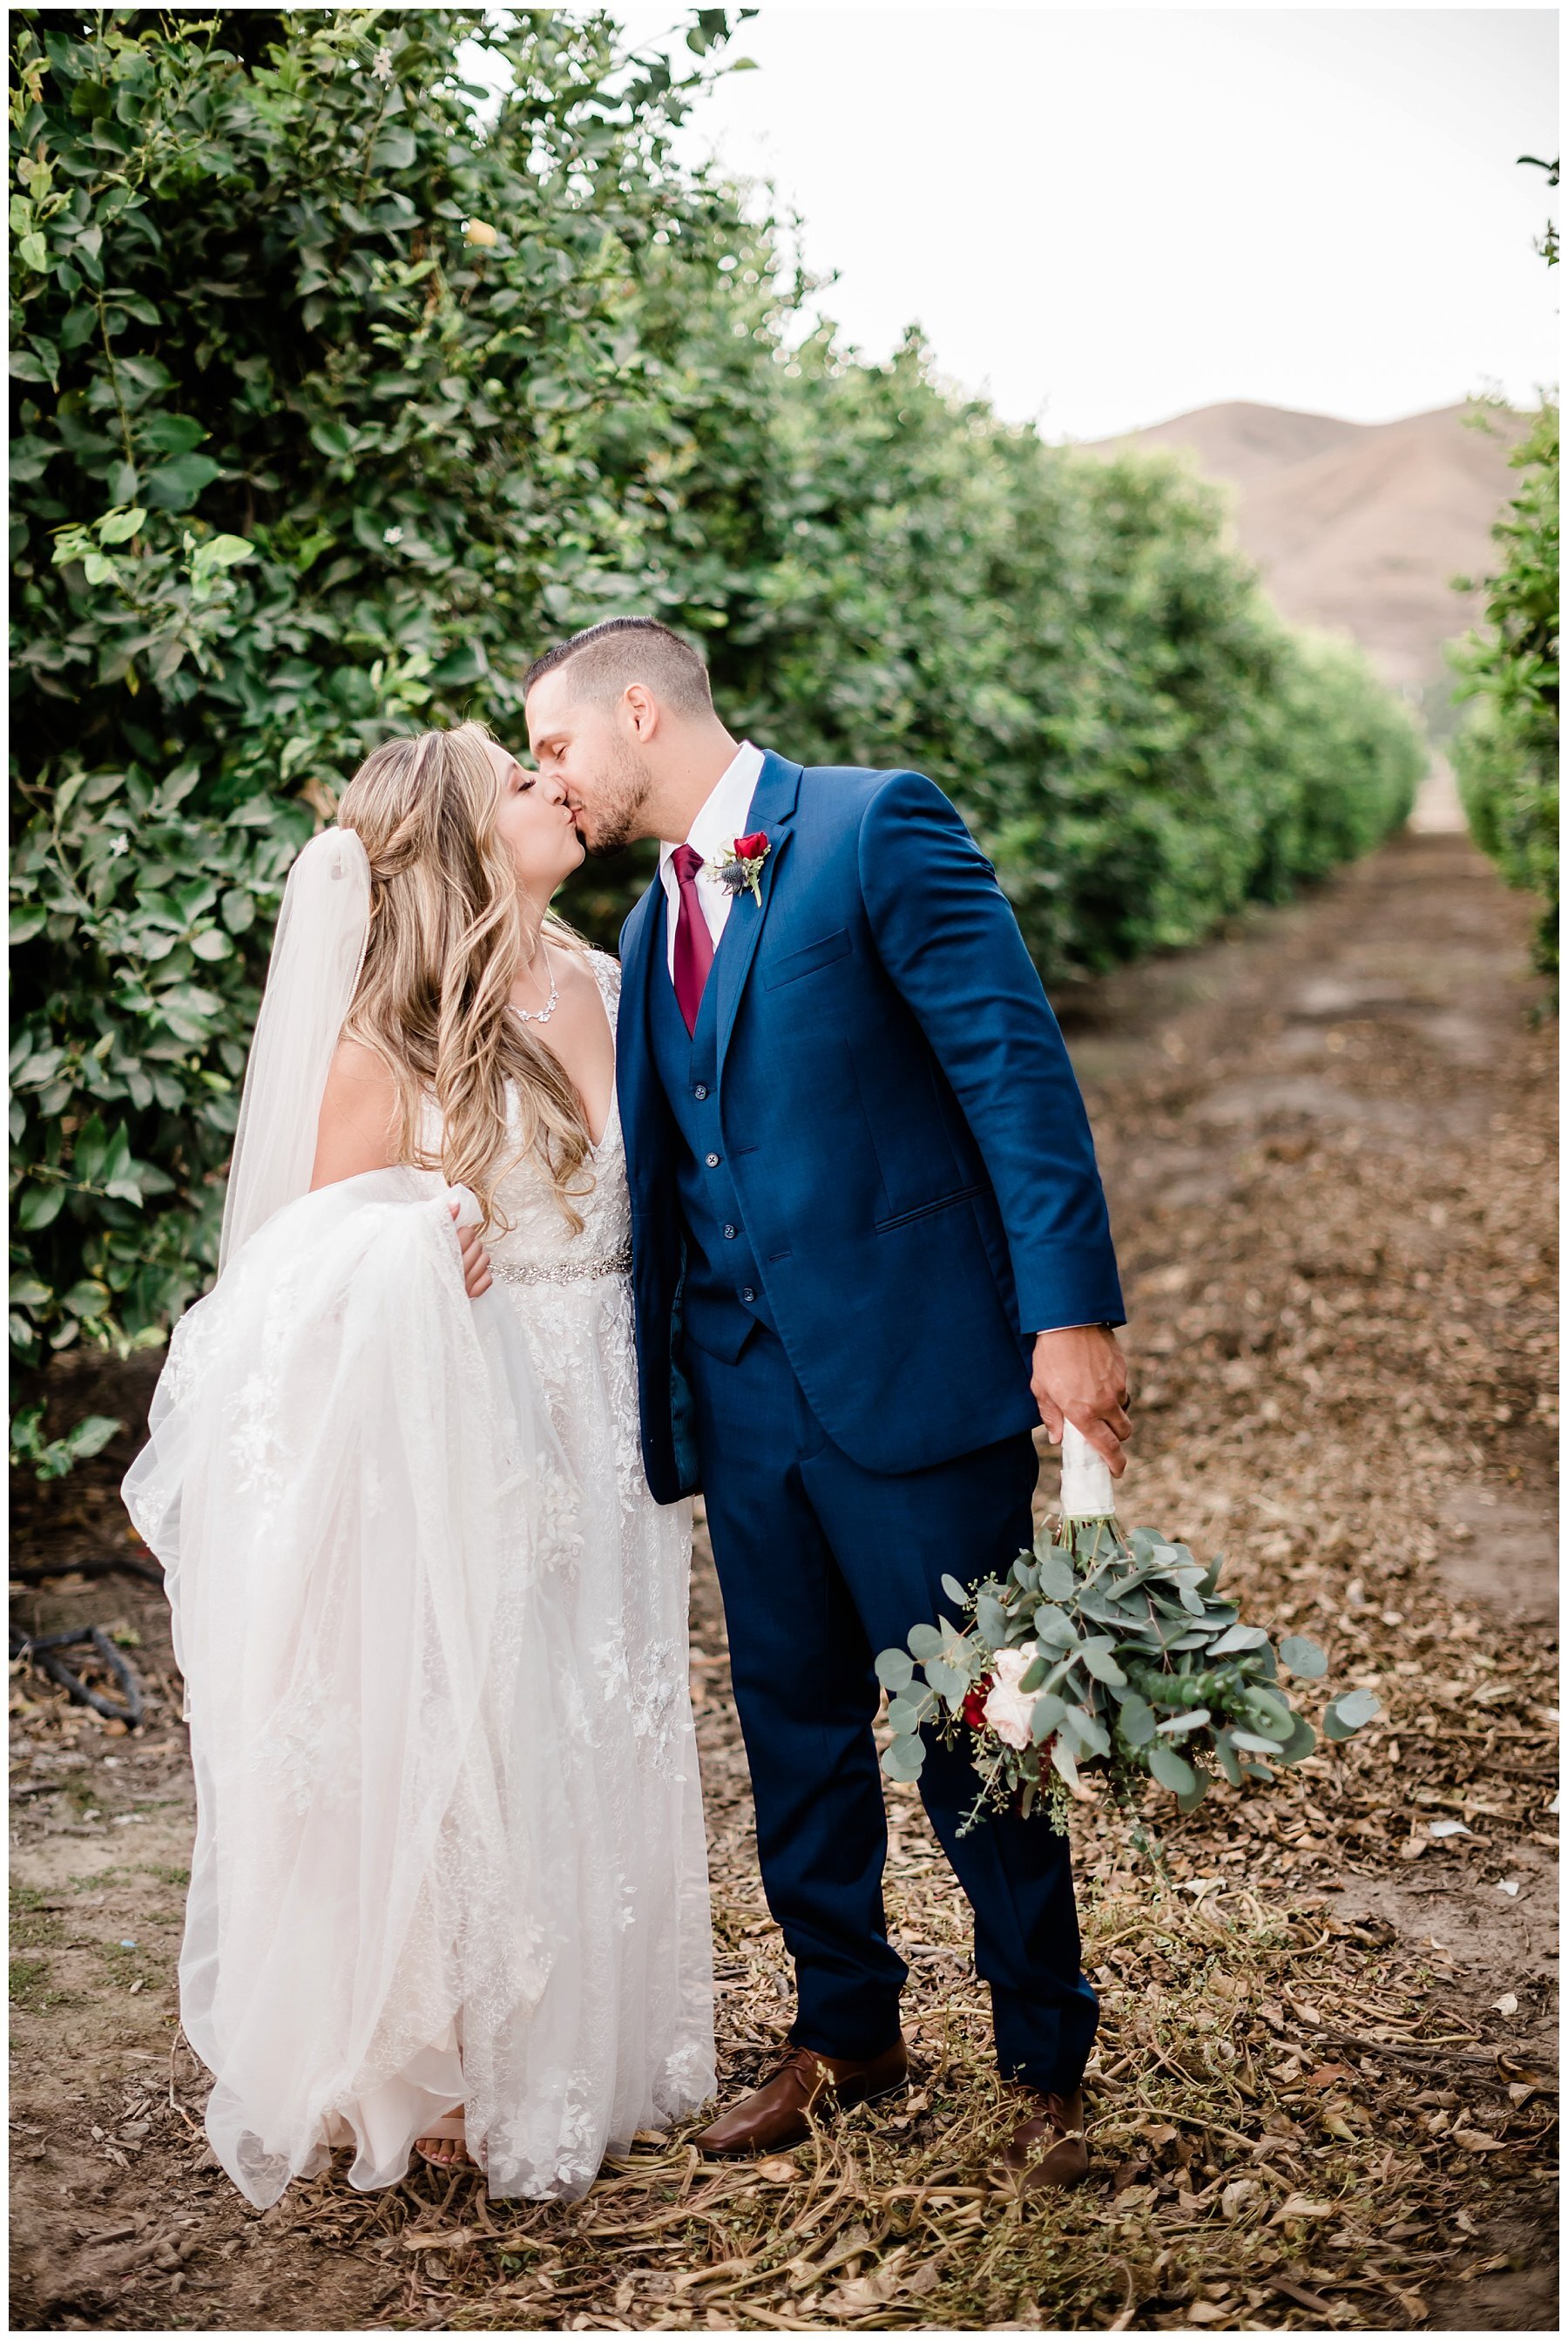  bride and groom together on a dirt path flanked by hedges 